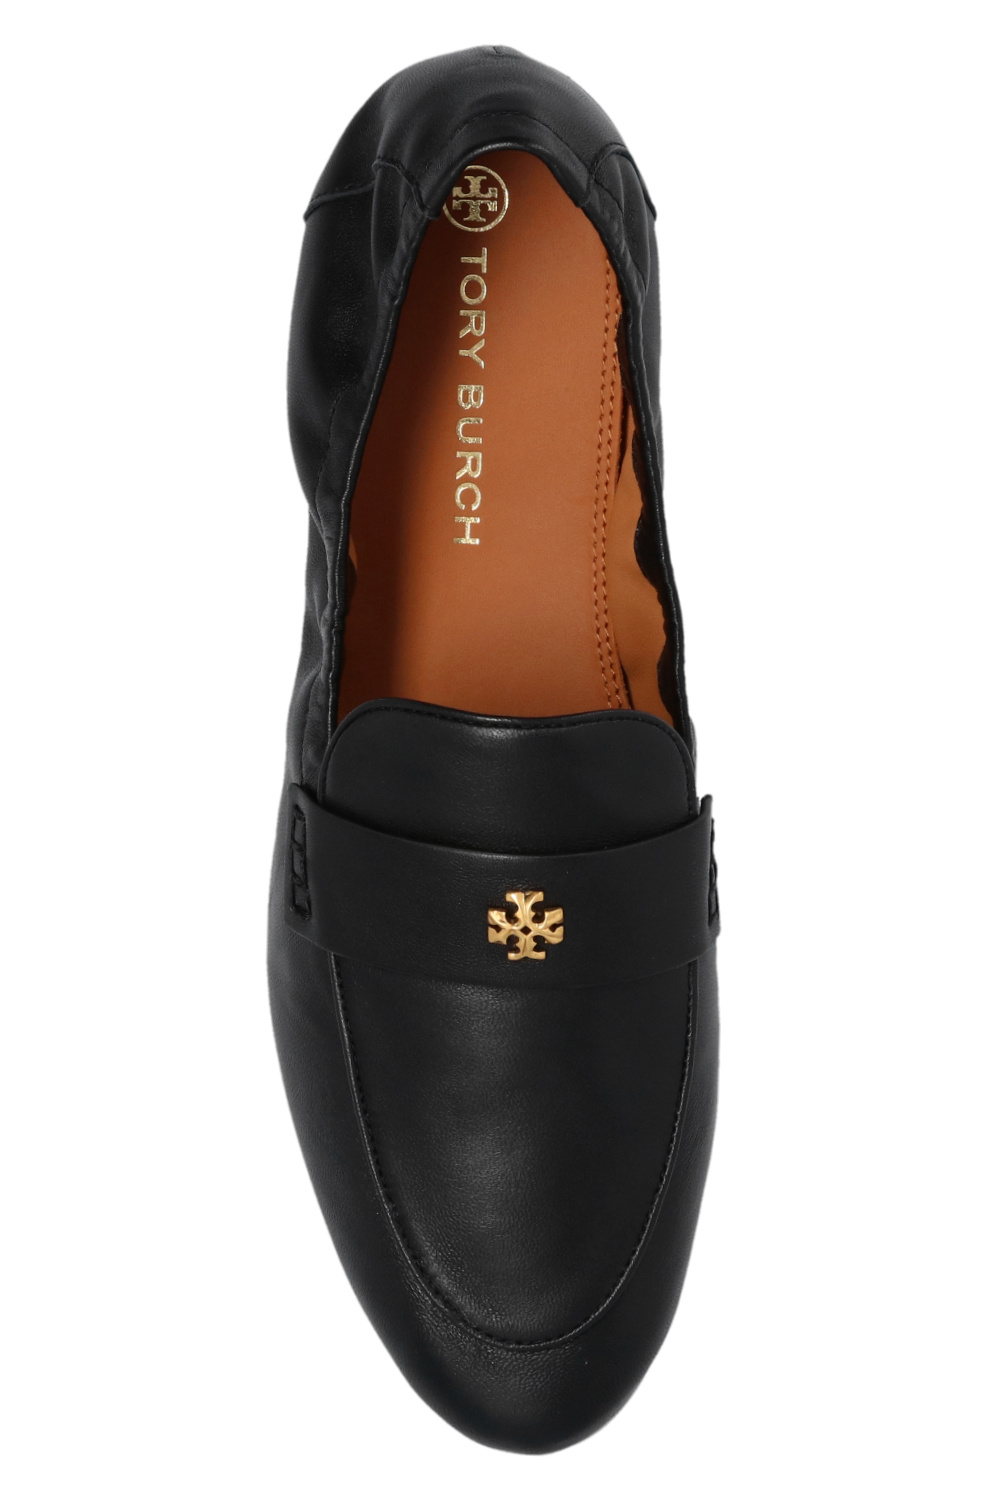 Tory Burch Leather loafers | Women's Shoes | Vitkac